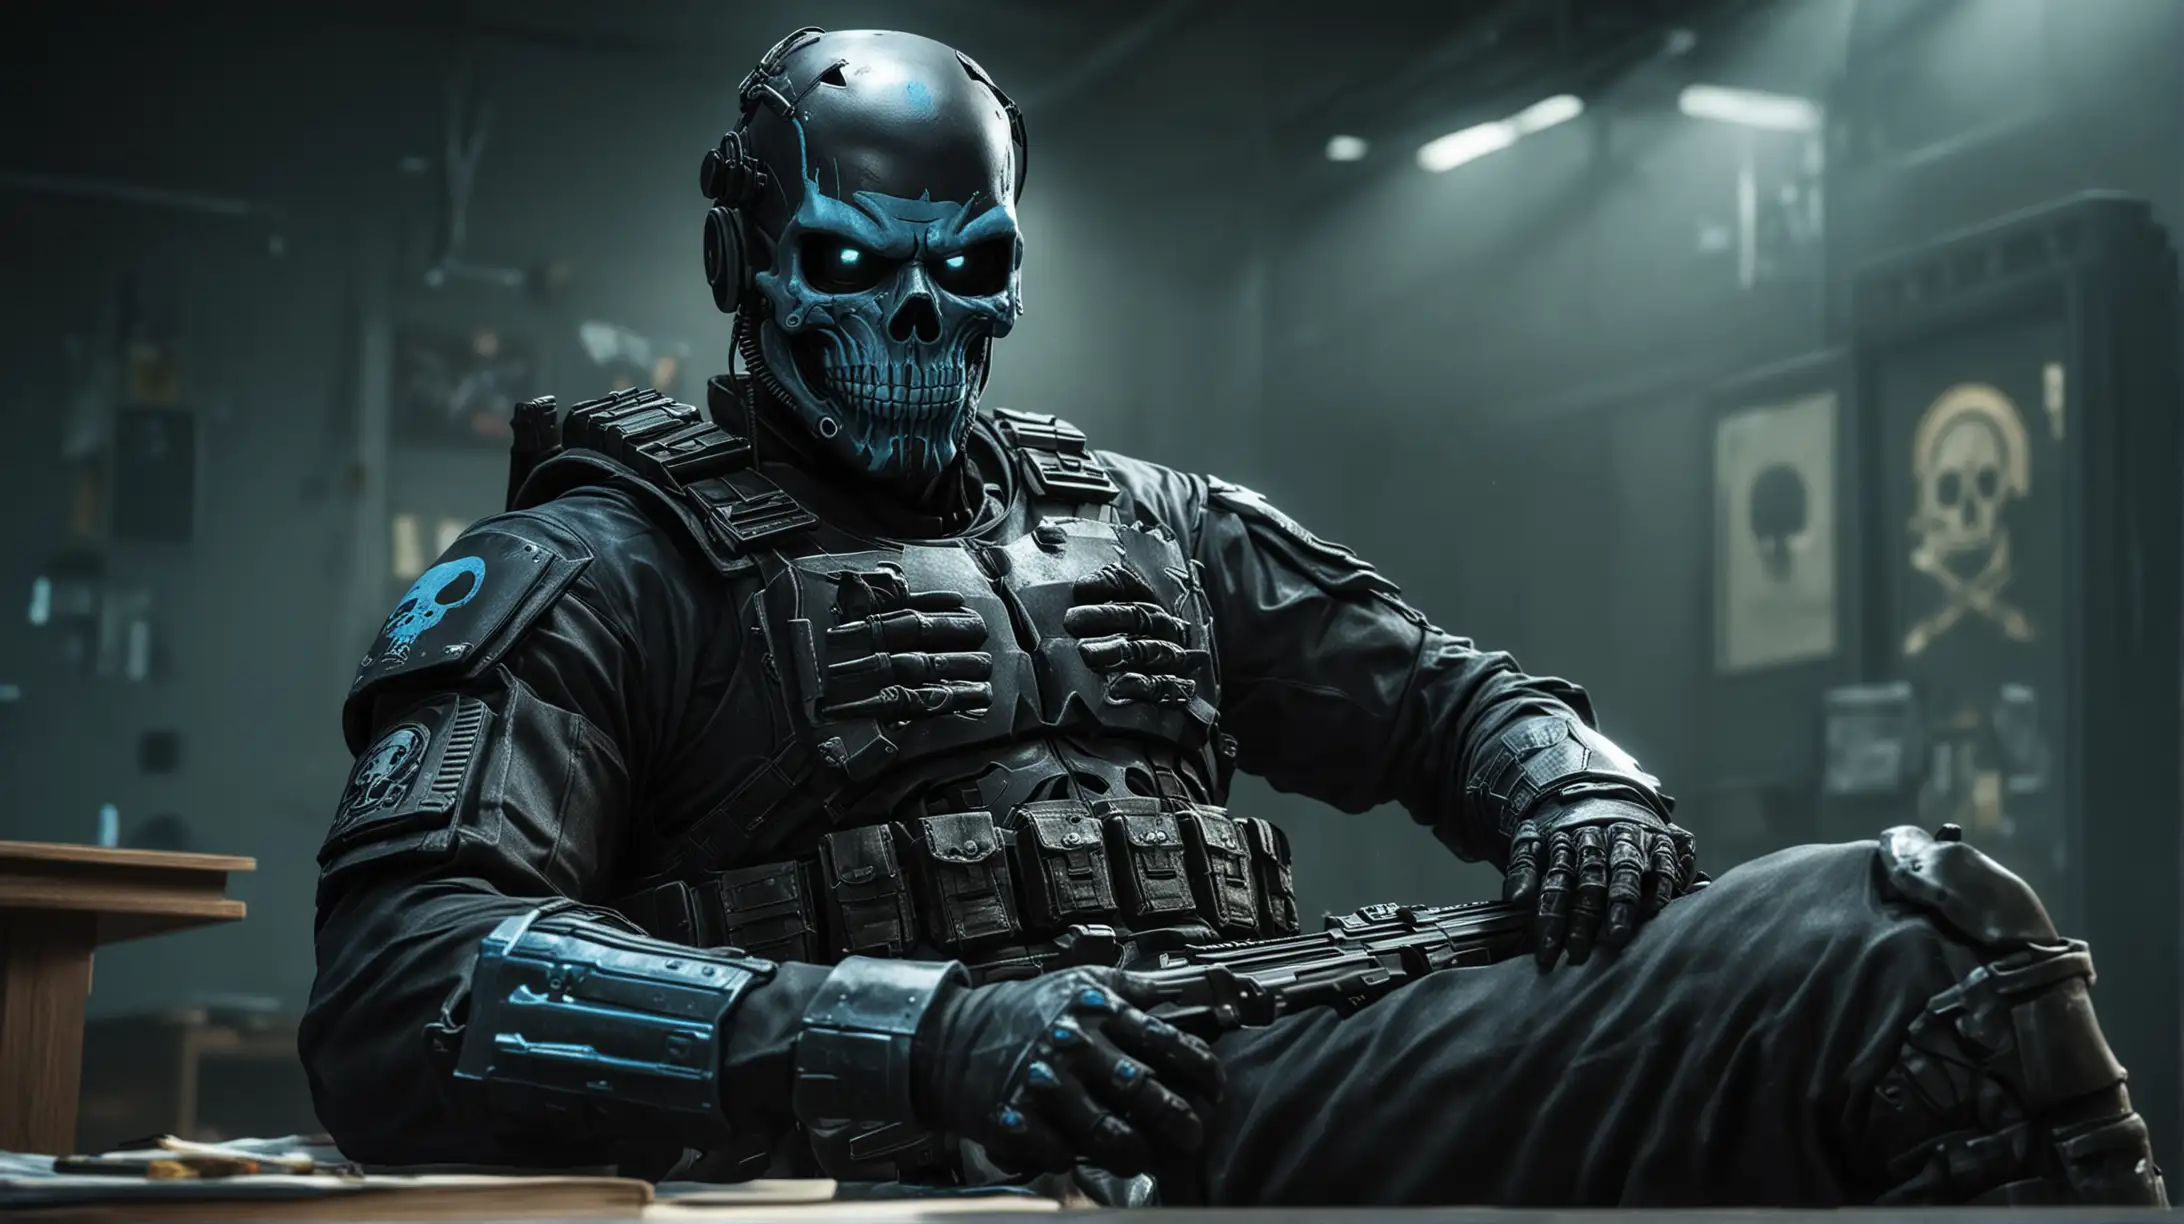 Black ops operator wearing all black armor, wearing helmet painted with a light blue skull, sitting down, holding pistols in hand, sitting in a school office, with dim lights